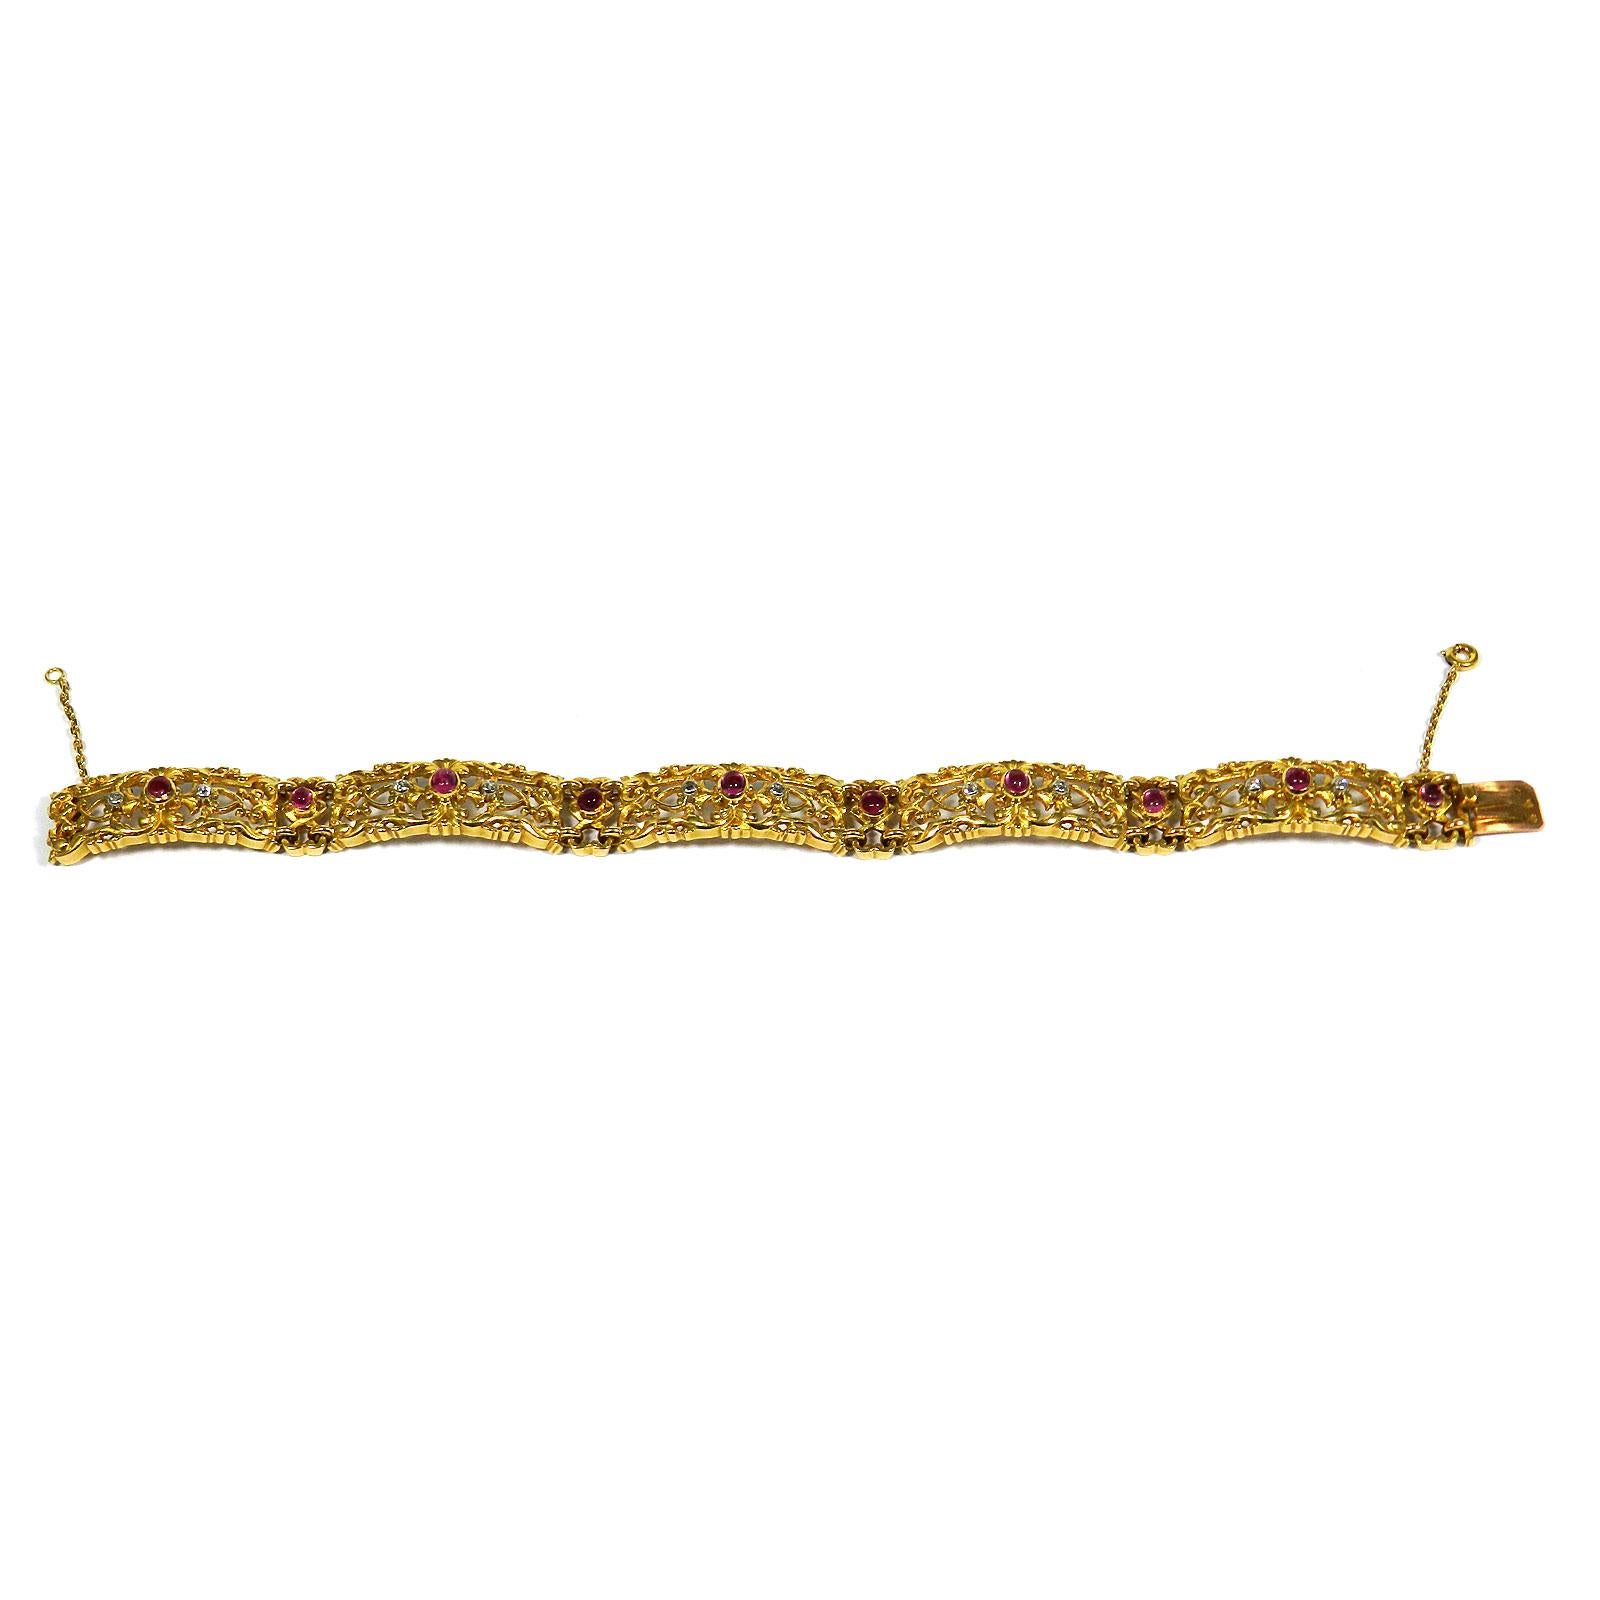 Art Nouveau Ruby ​​Diamond 18K Gold Bracelet, Paris circa 1890

This very decorative gold bracelet consists of massive, openwork floral and finely chiseled links, which are set with 10 bright red ruby ​​cabochons and rose cut diamonds. Signed with a